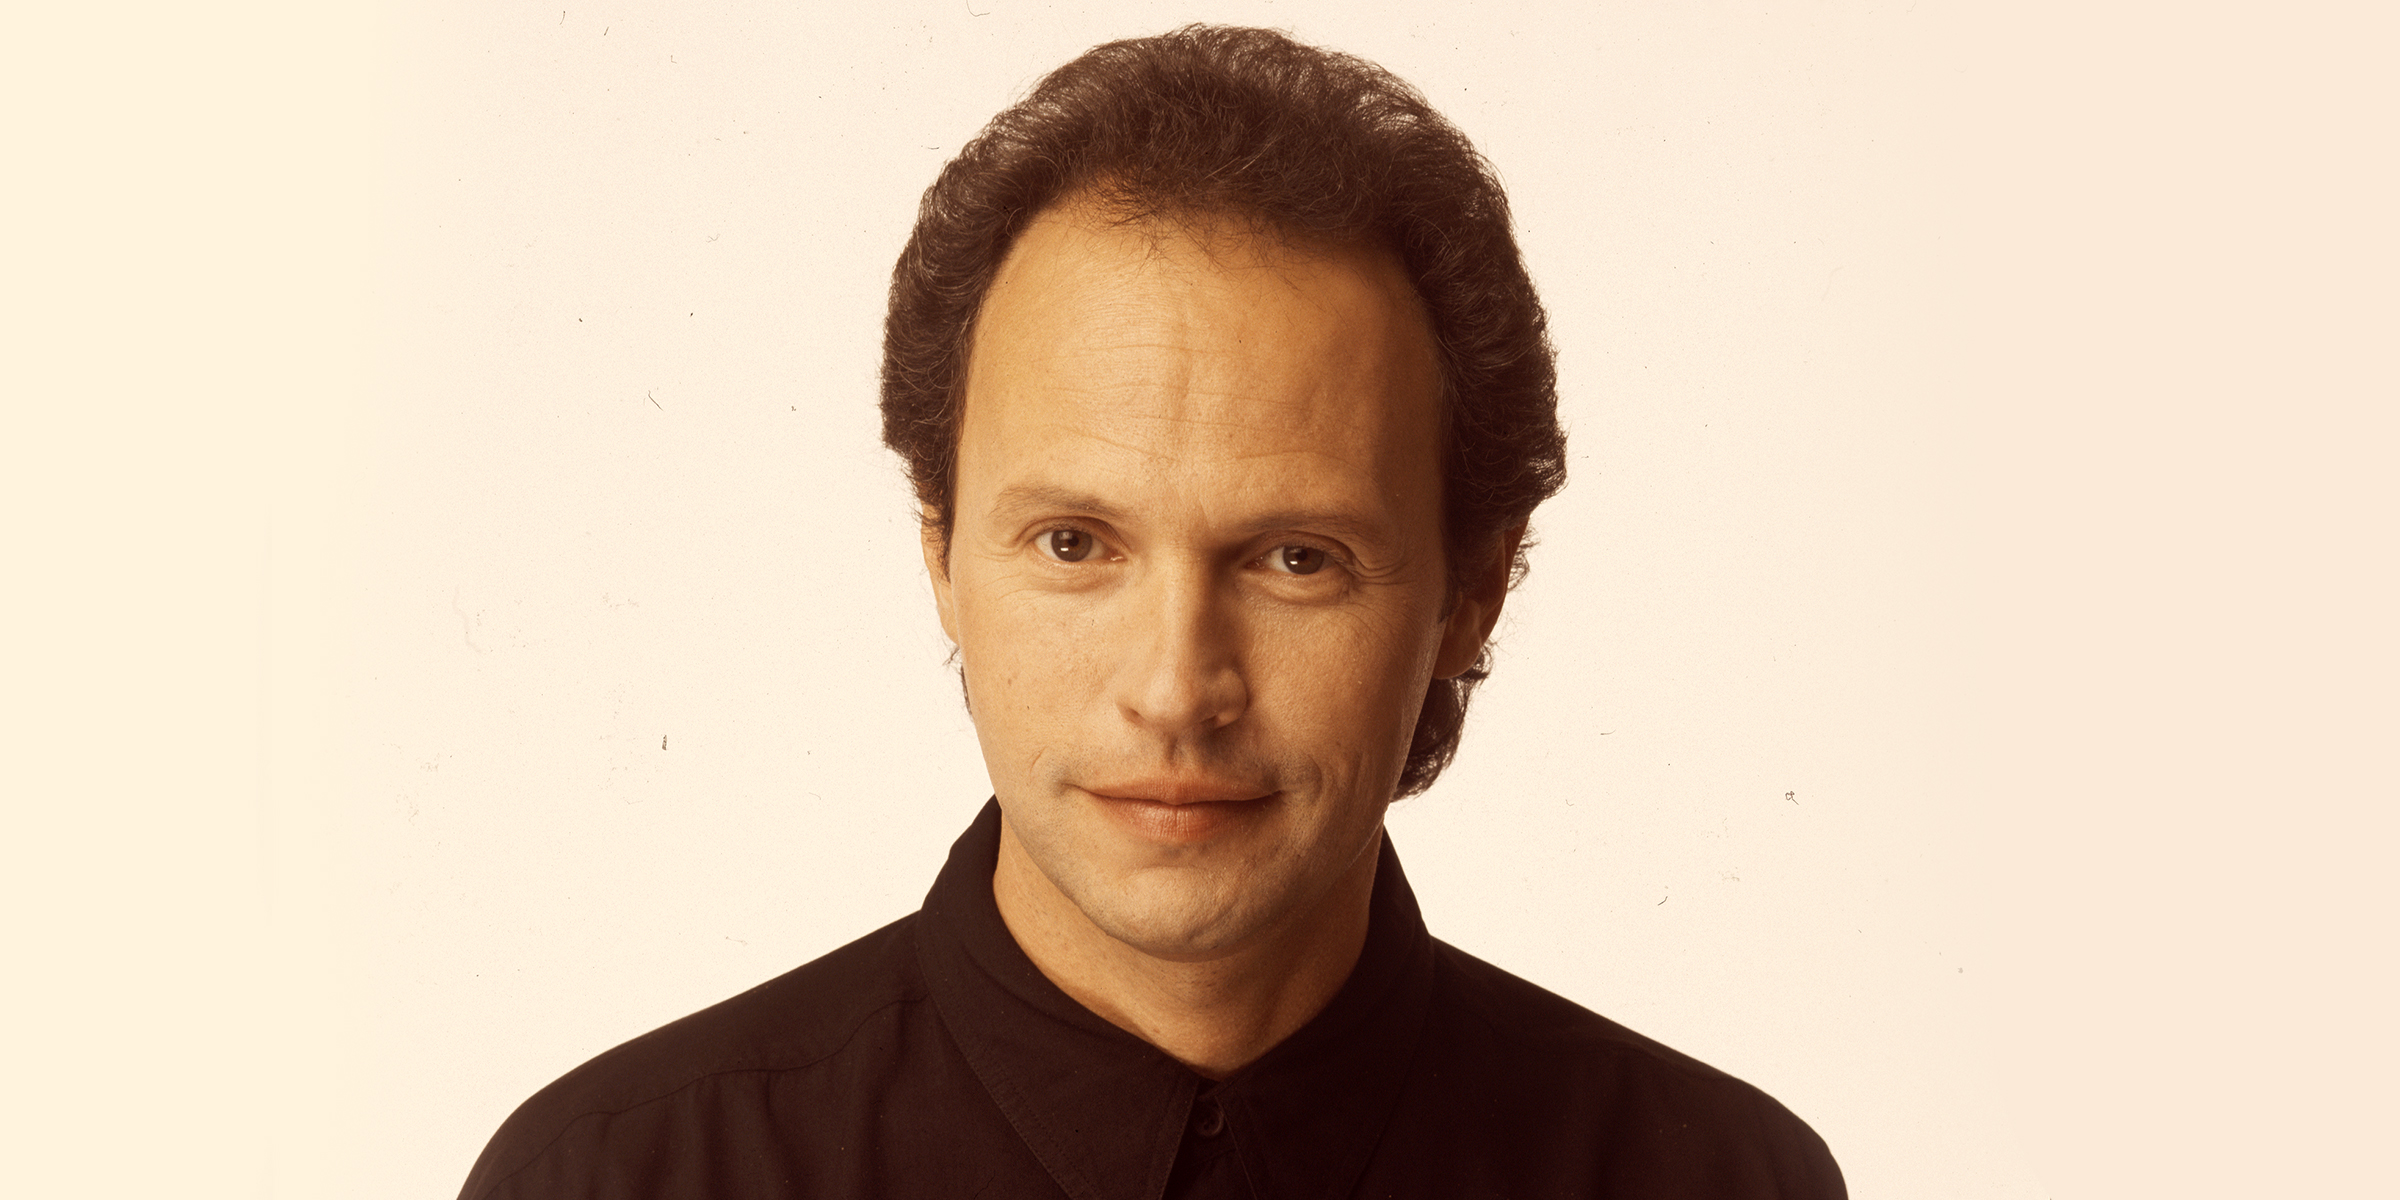 Billy Crystal, 1980 | Source: Getty Images